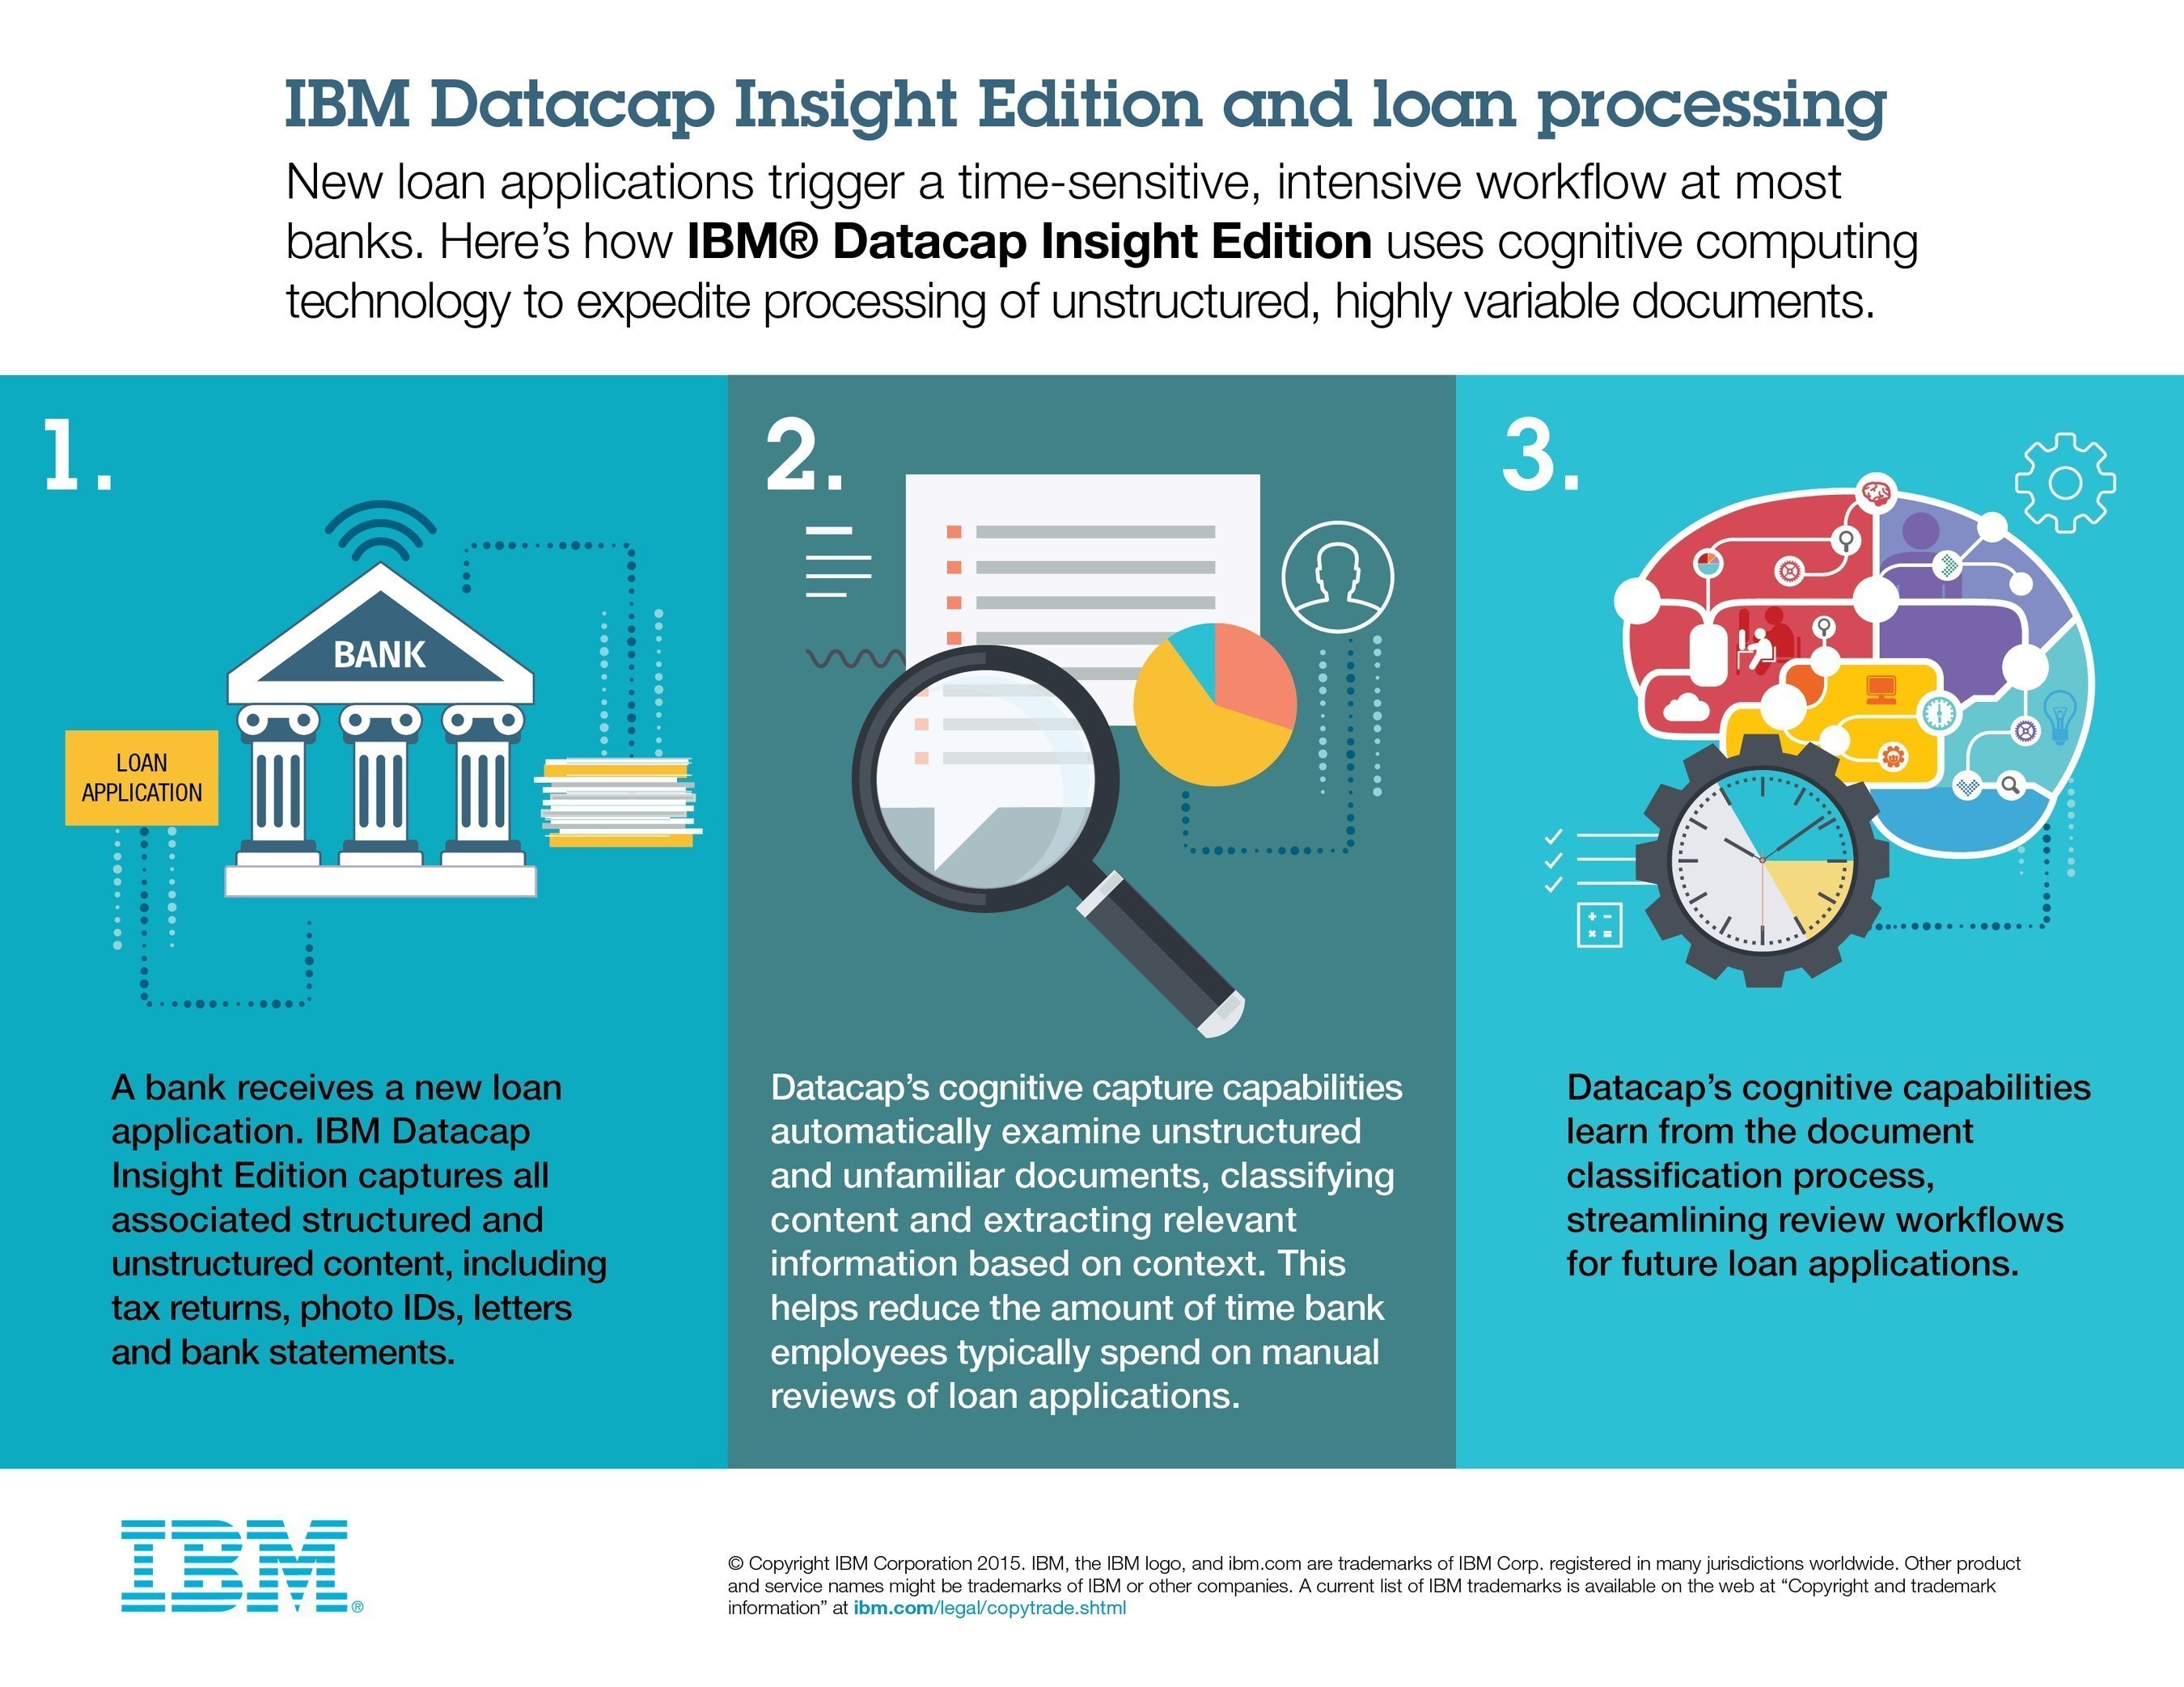 IBM Datacap Insight Edition uses cognitive computing capabilities to expedite processing of unstructured, highly variable documents.